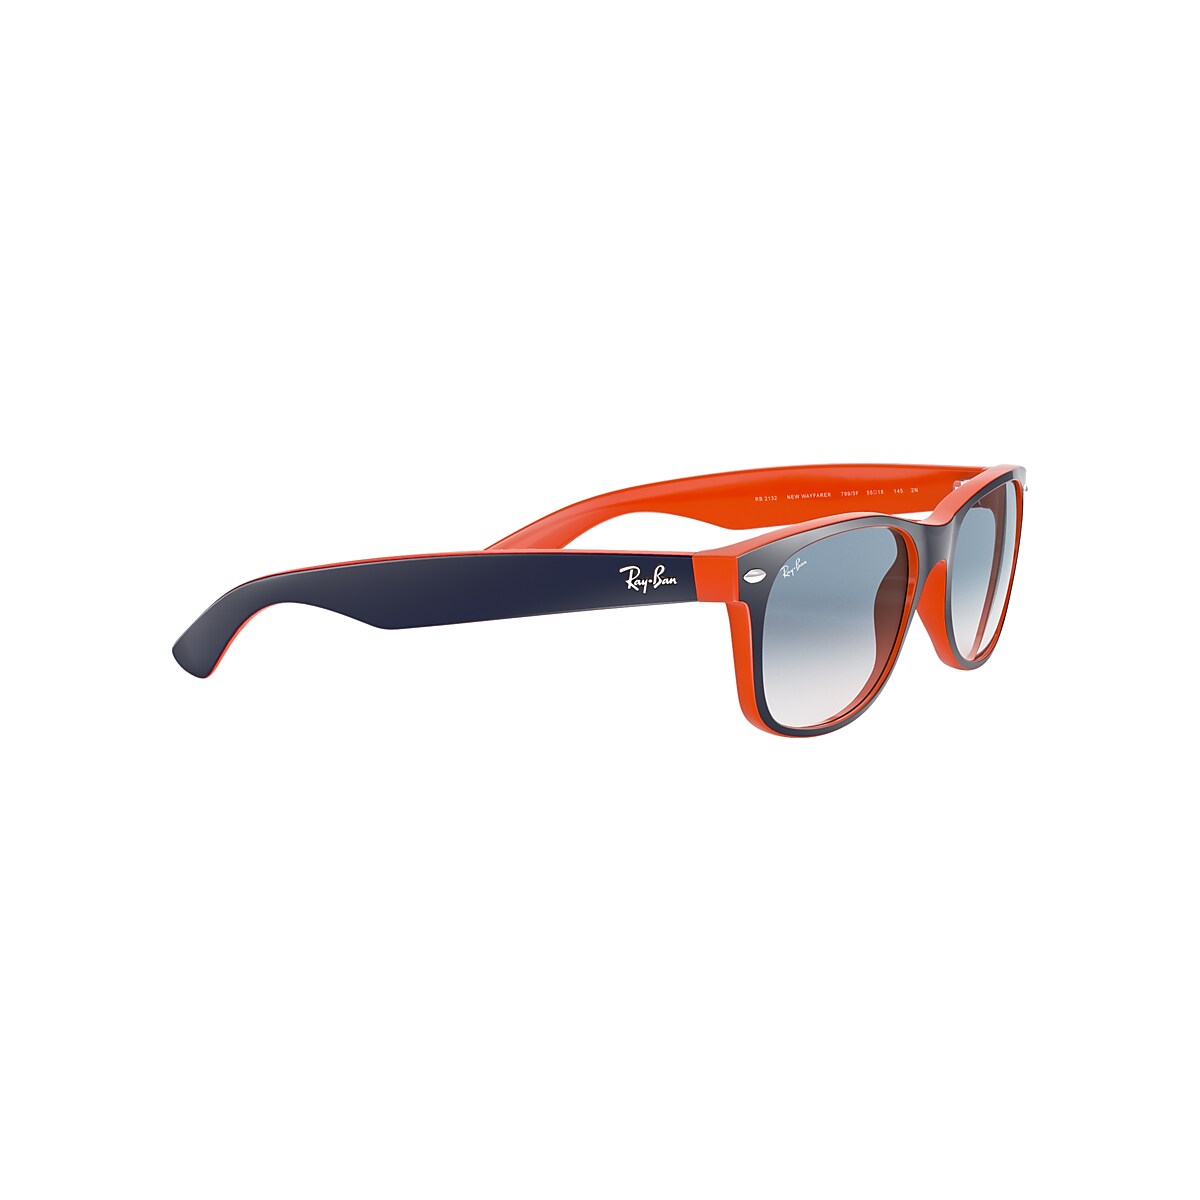 New Wayfarer Color Mix Sunglasses in Blue On Orange and Light Blue | Ray-Ban ®